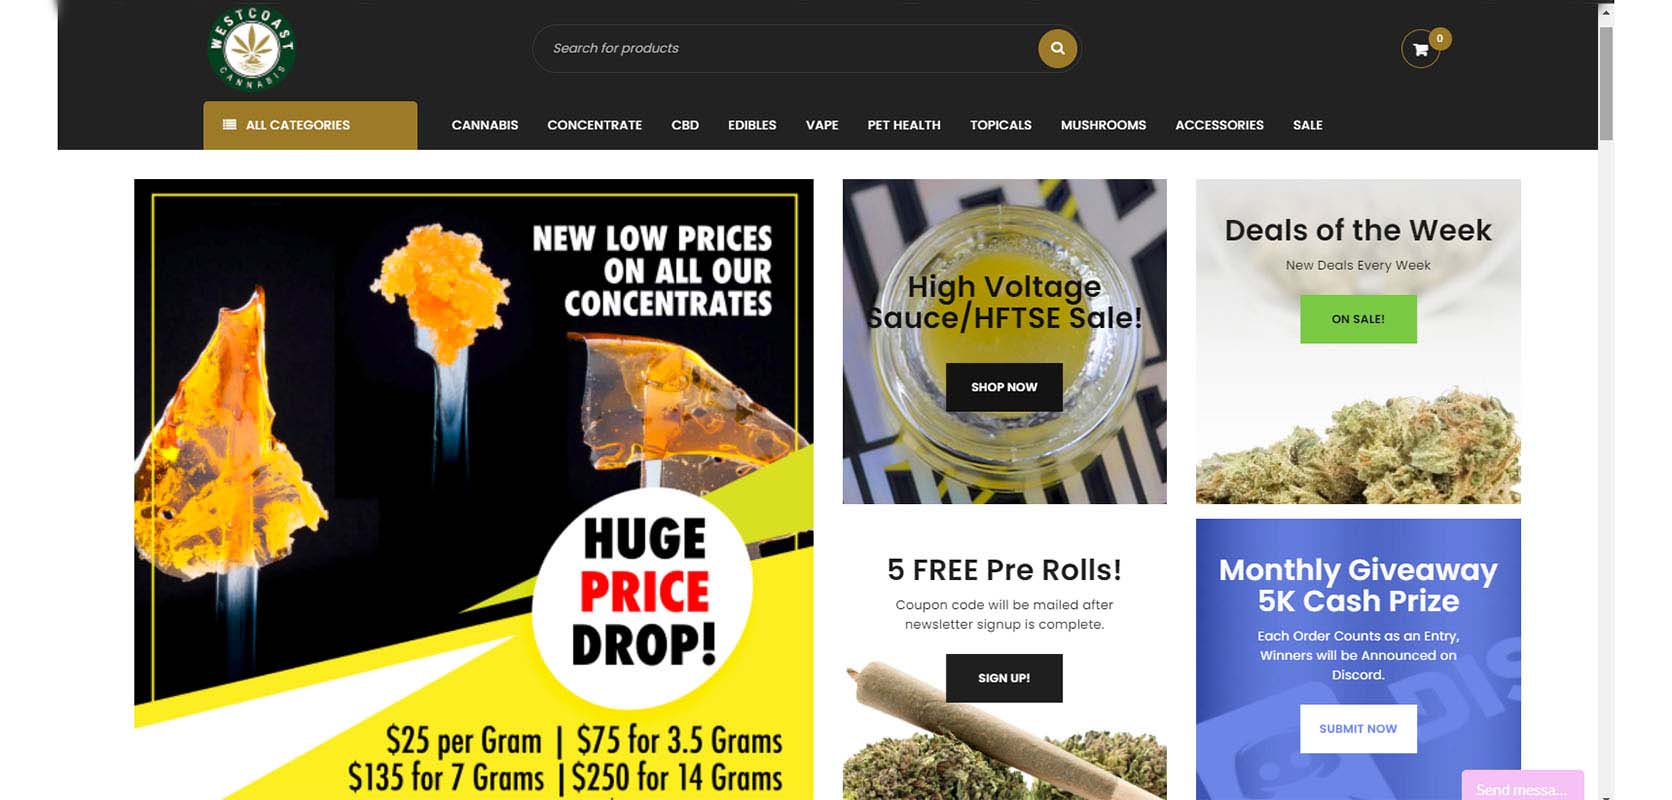 Image of the homepage for West Coast Cannabis. mail order marijuana online dispensary to buy weed online in Canada.